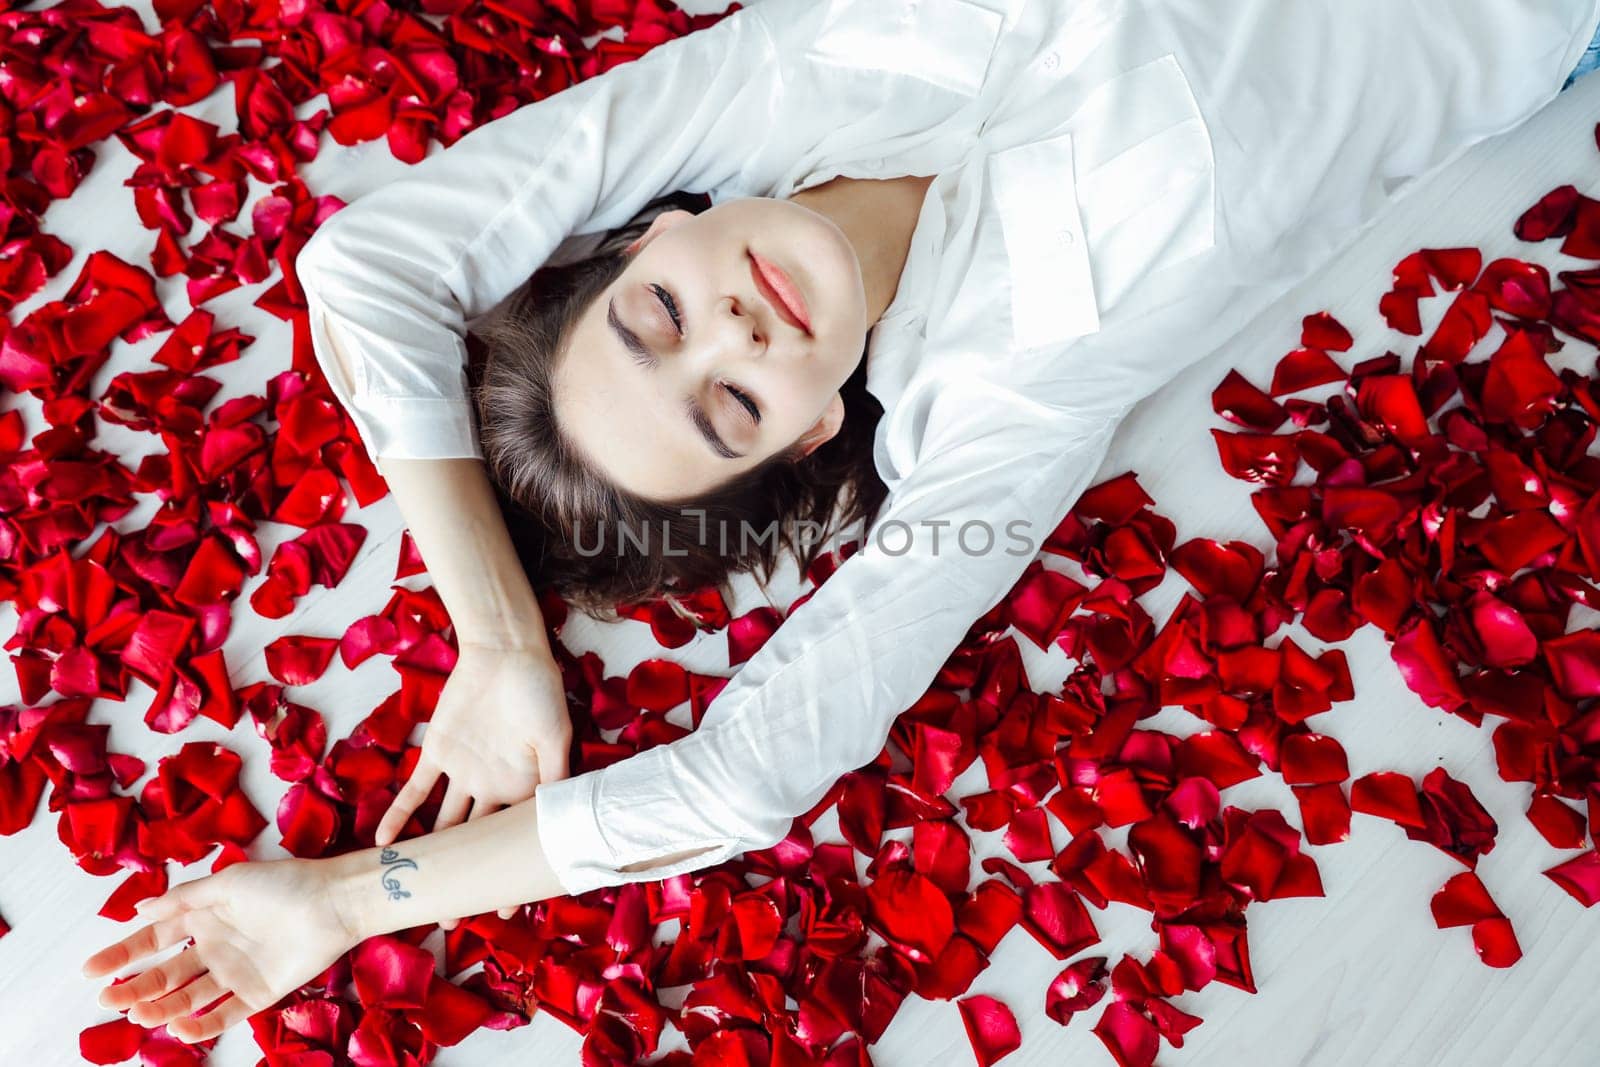 a woman lies on the floor with her eyes closed in red rose petals